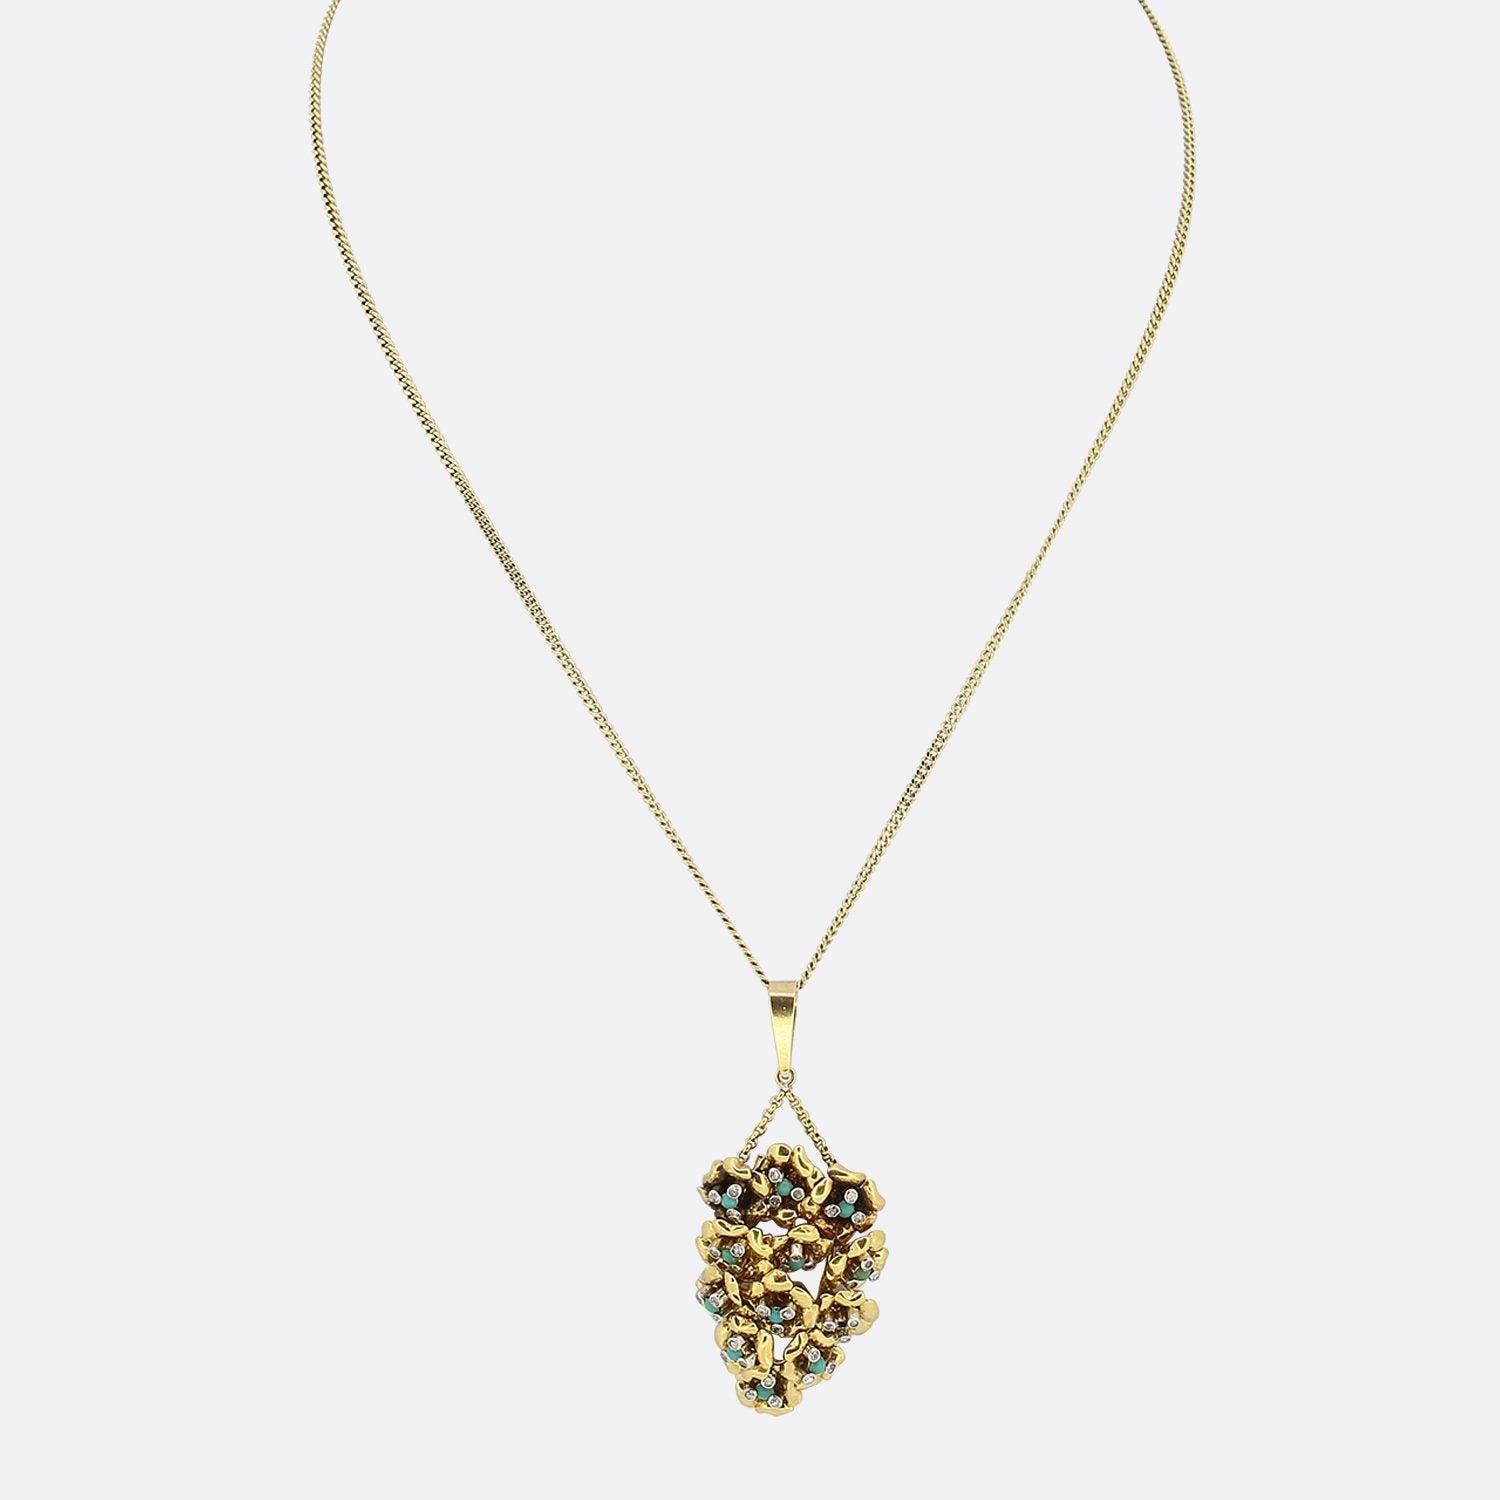 This is a vintage diamond and turquoise pendant. It has been set with multiple cabochon turquoise stones and thirty-six eight cut diamonds in a moveable setting that's been crafted in 18ct yellow gold. The bale is connected by a split chain and